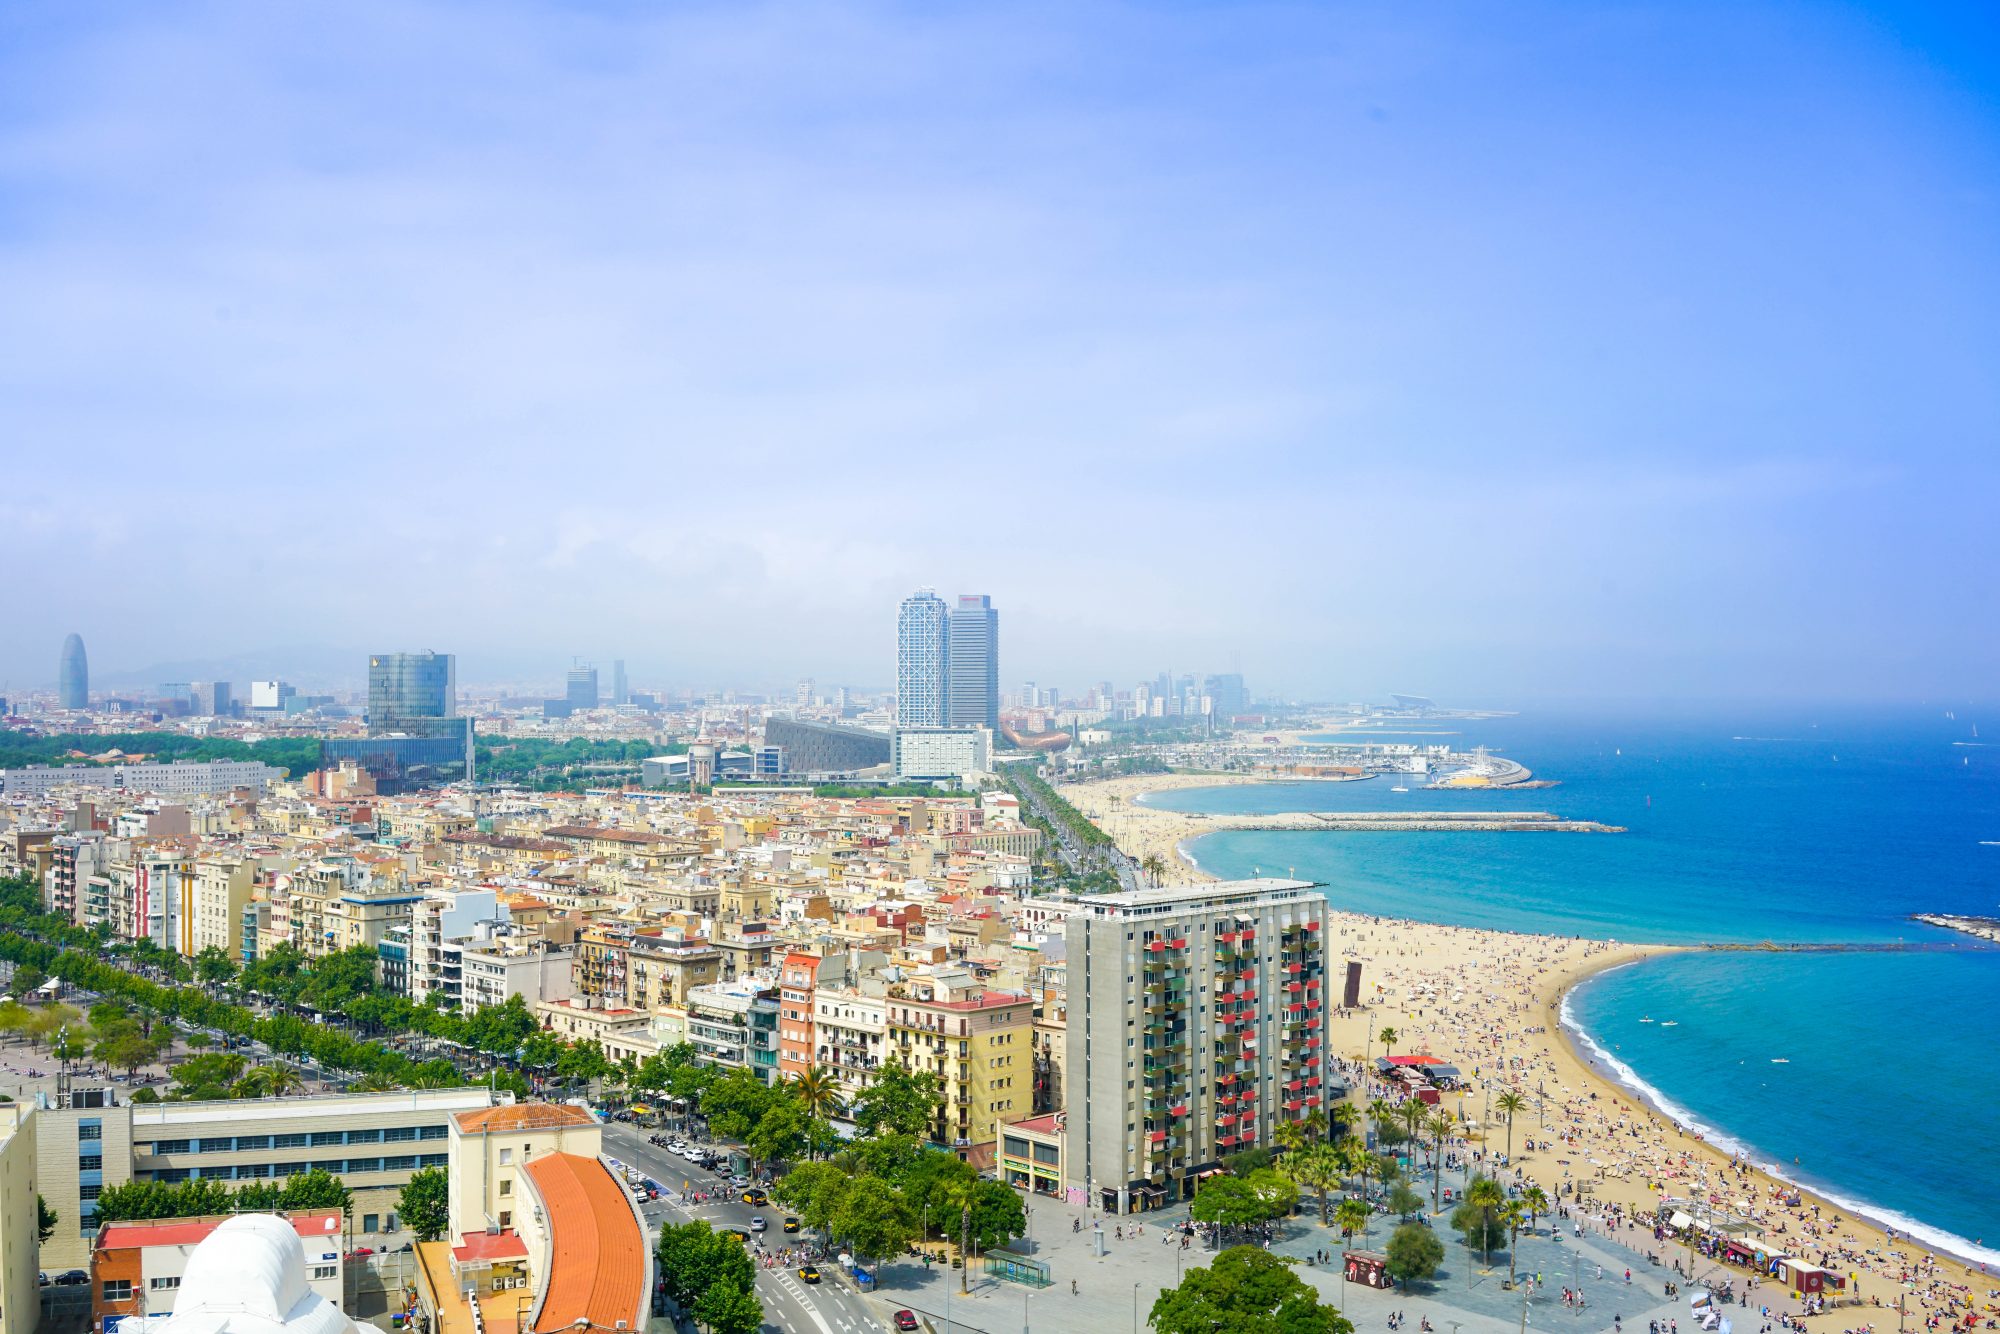 Barcelona is one of the most visited cities in Spain